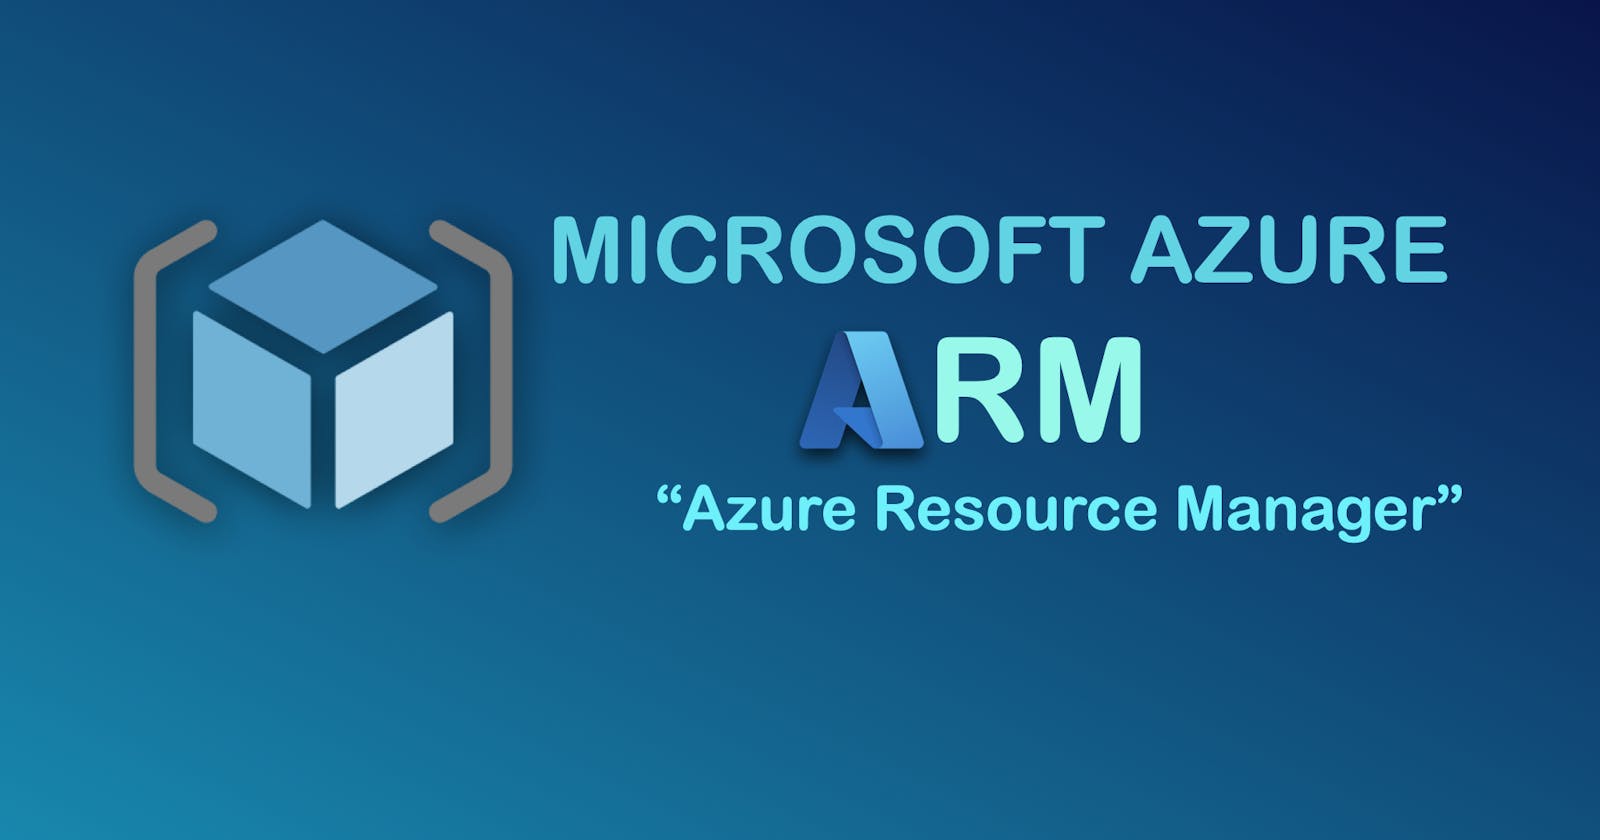 [MS Azure] ARM - Azure Resource Manager